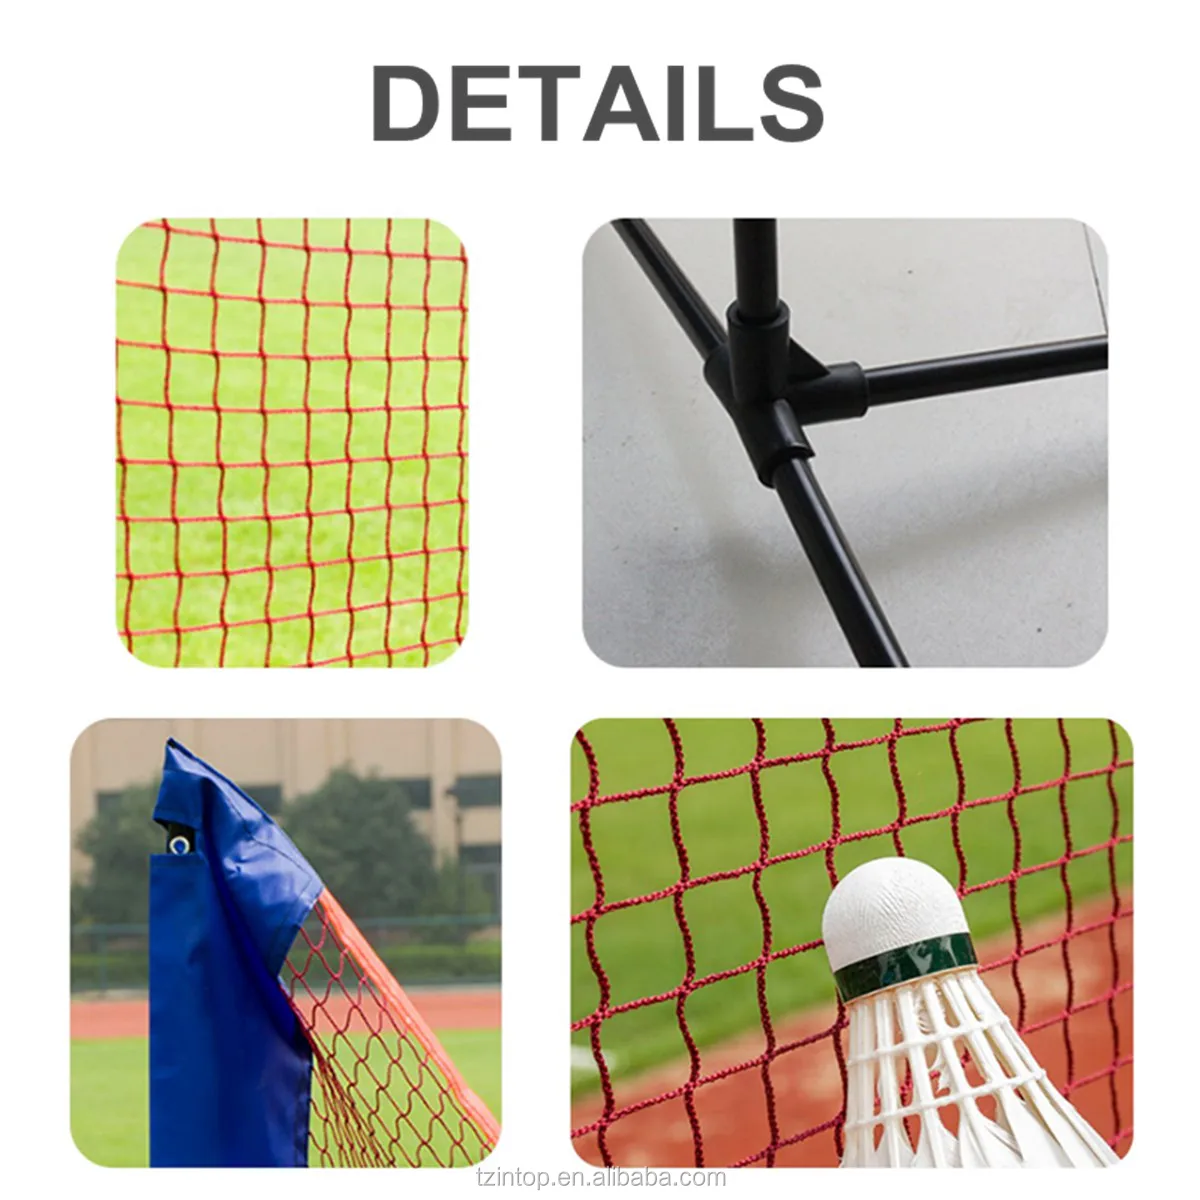 Cheap Price Outdoor Uv Resistant Portable And Foldable Badminton Net ...